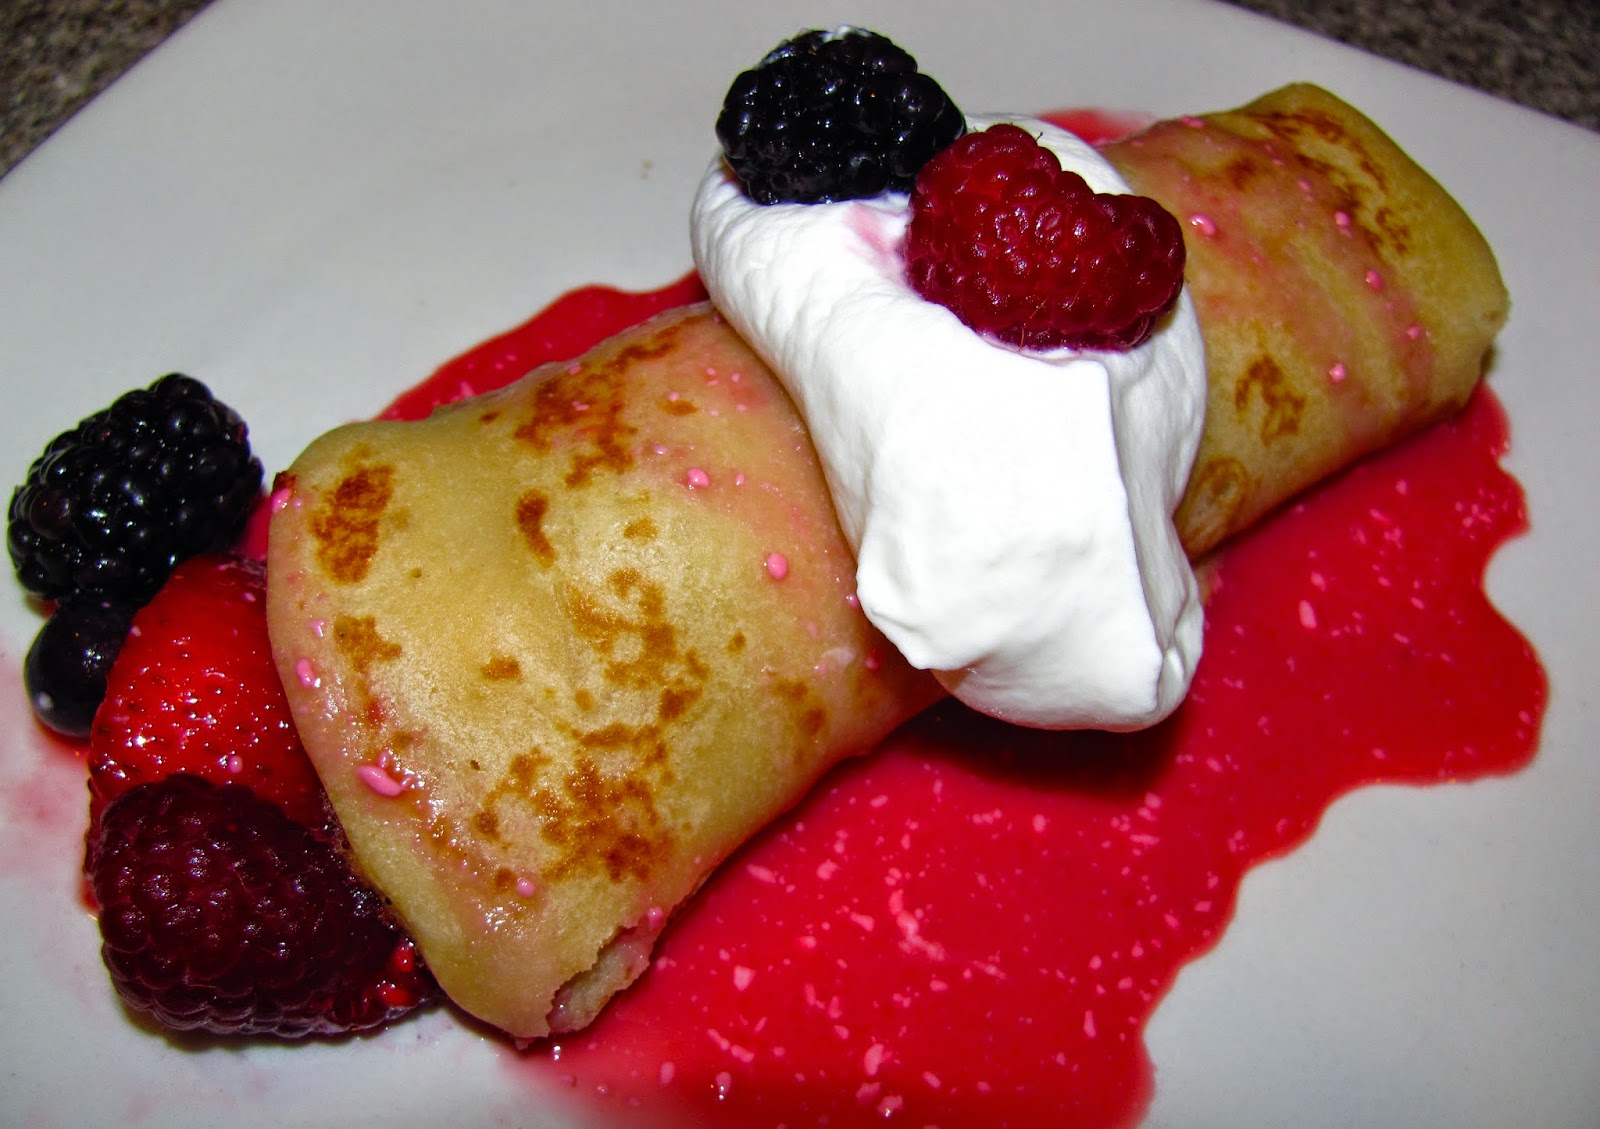 For the Love of Food: Brunch Very Berry Vanilla Crepes with Raspberry Sauce